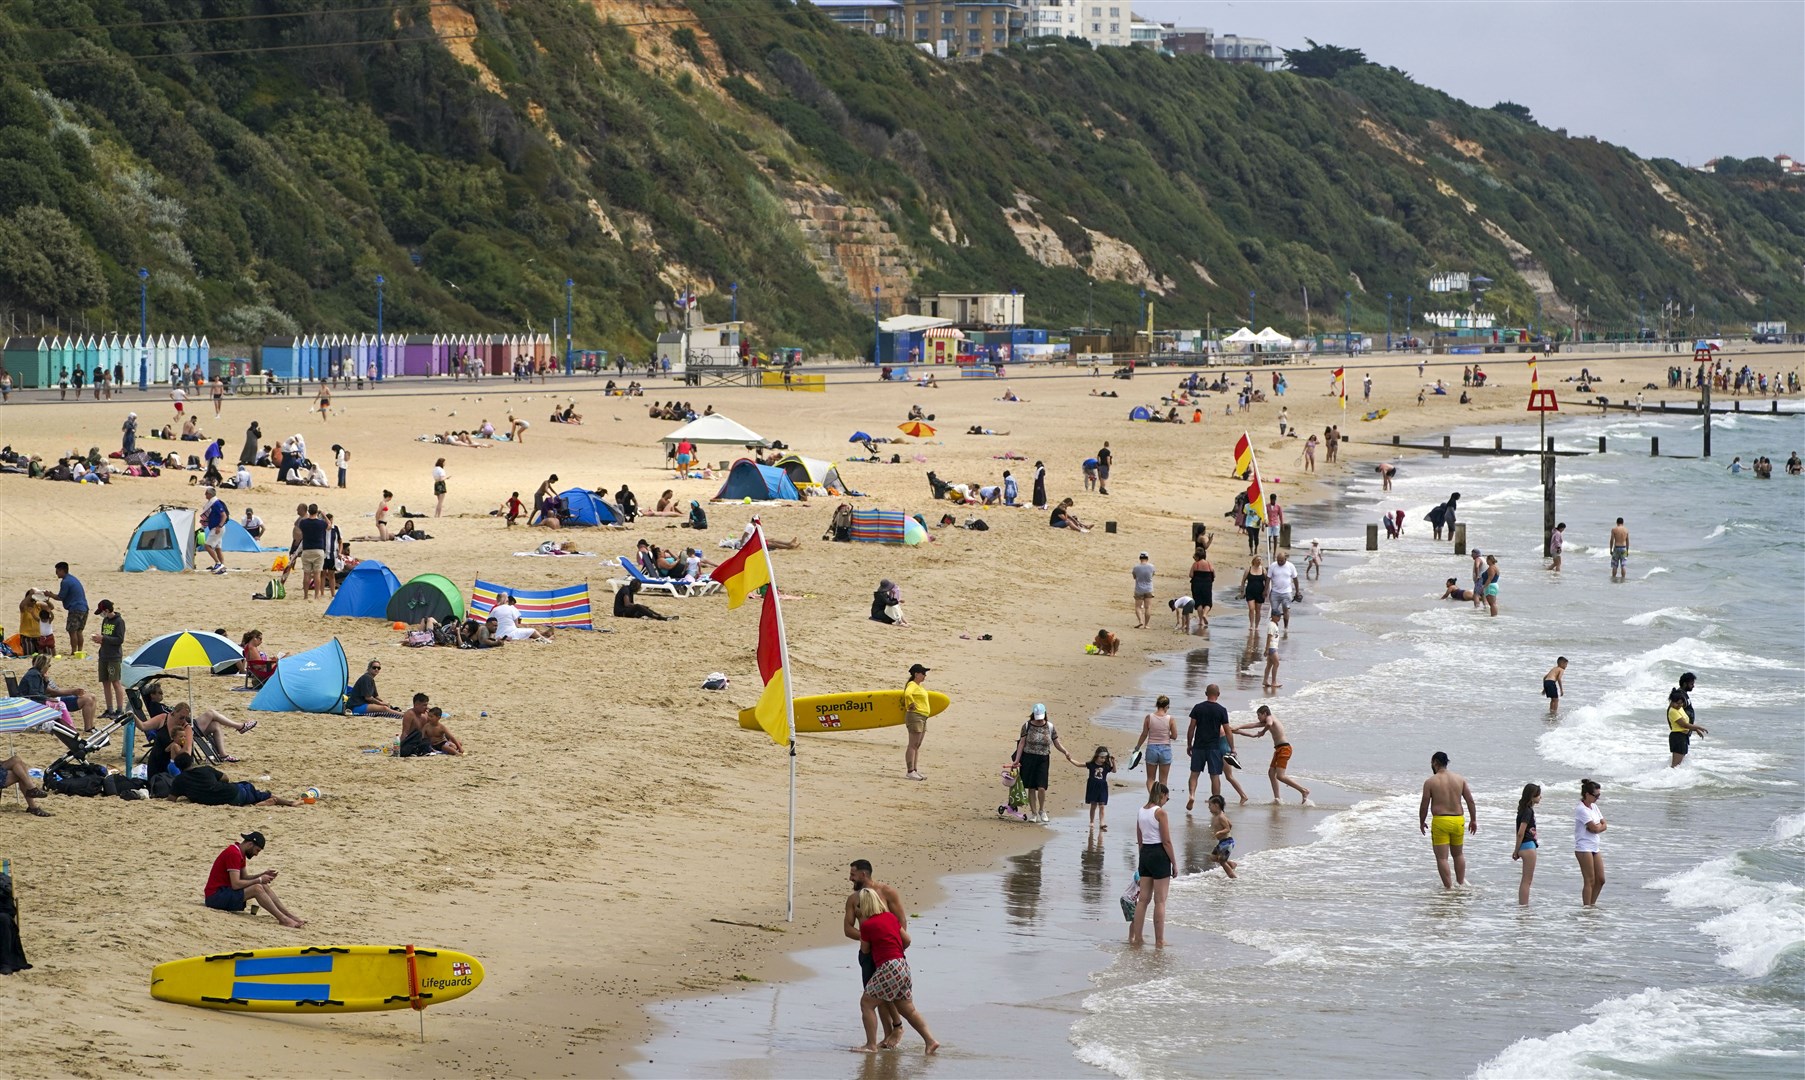 People enjoying the hot weather on Bournemouth beach after temperatures topped 40C in the UK for the first time ever (PA)